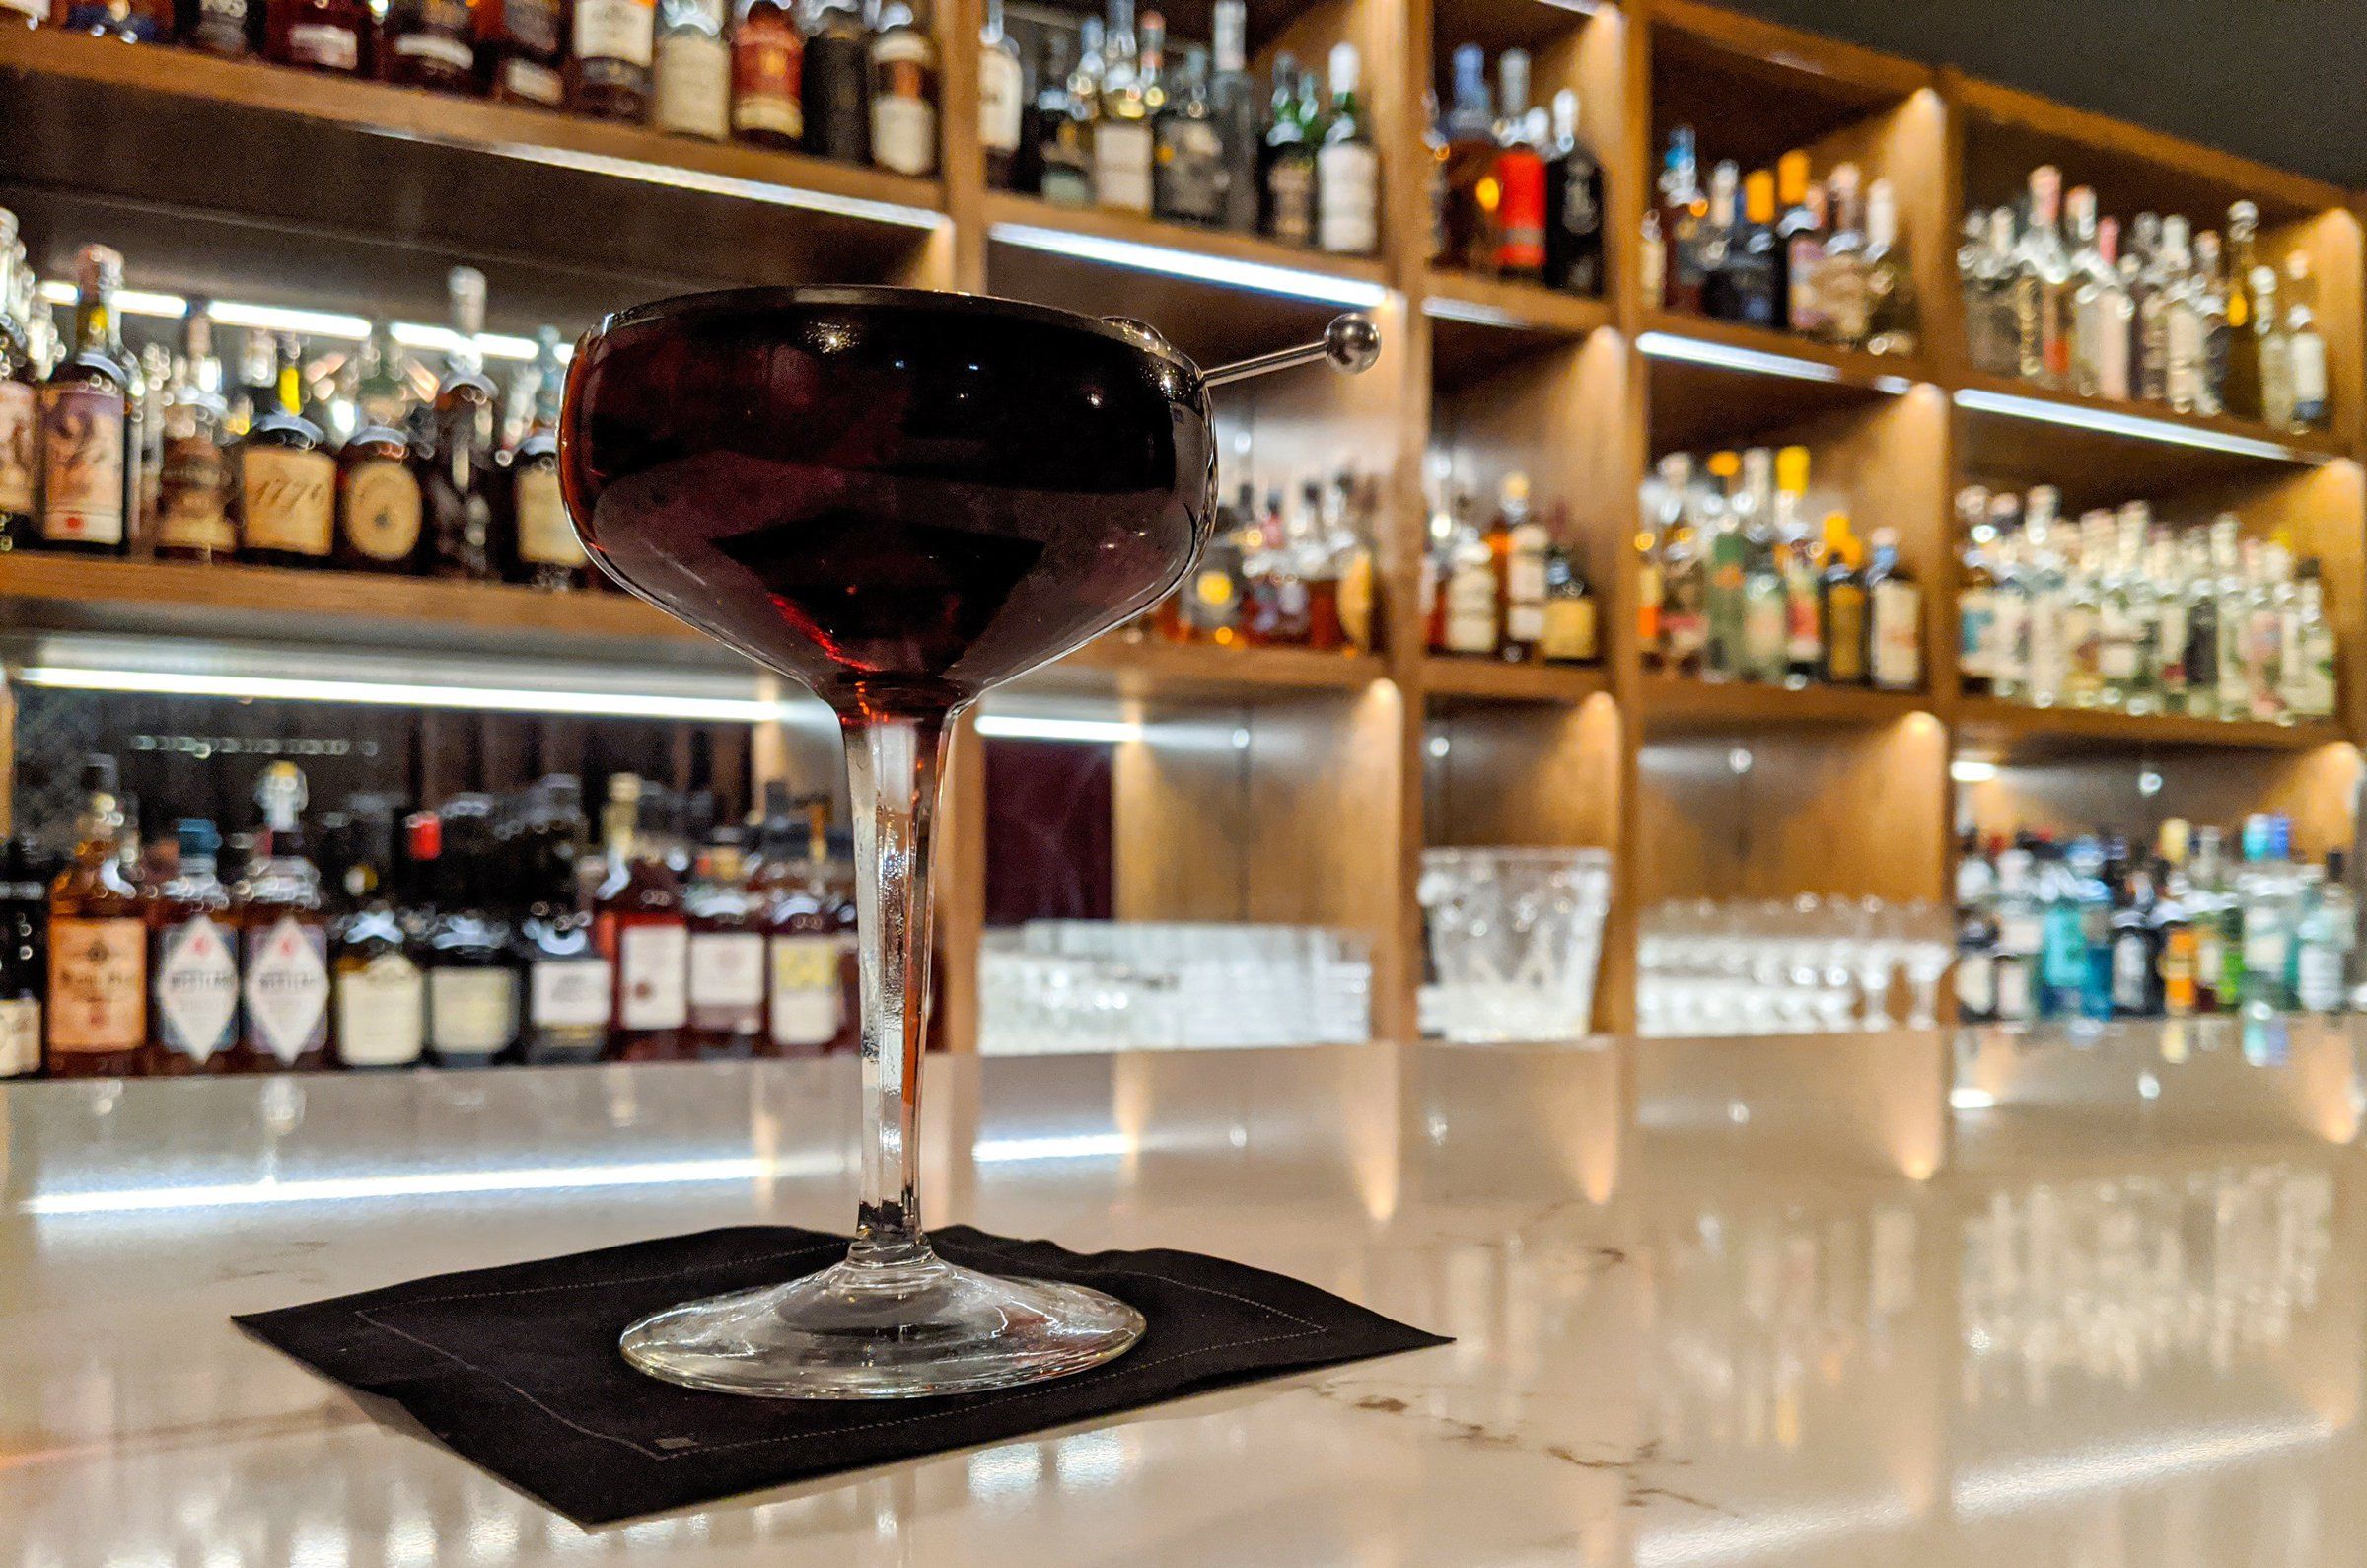 The Seattle area's most anticipated craft cocktail bar of 2020